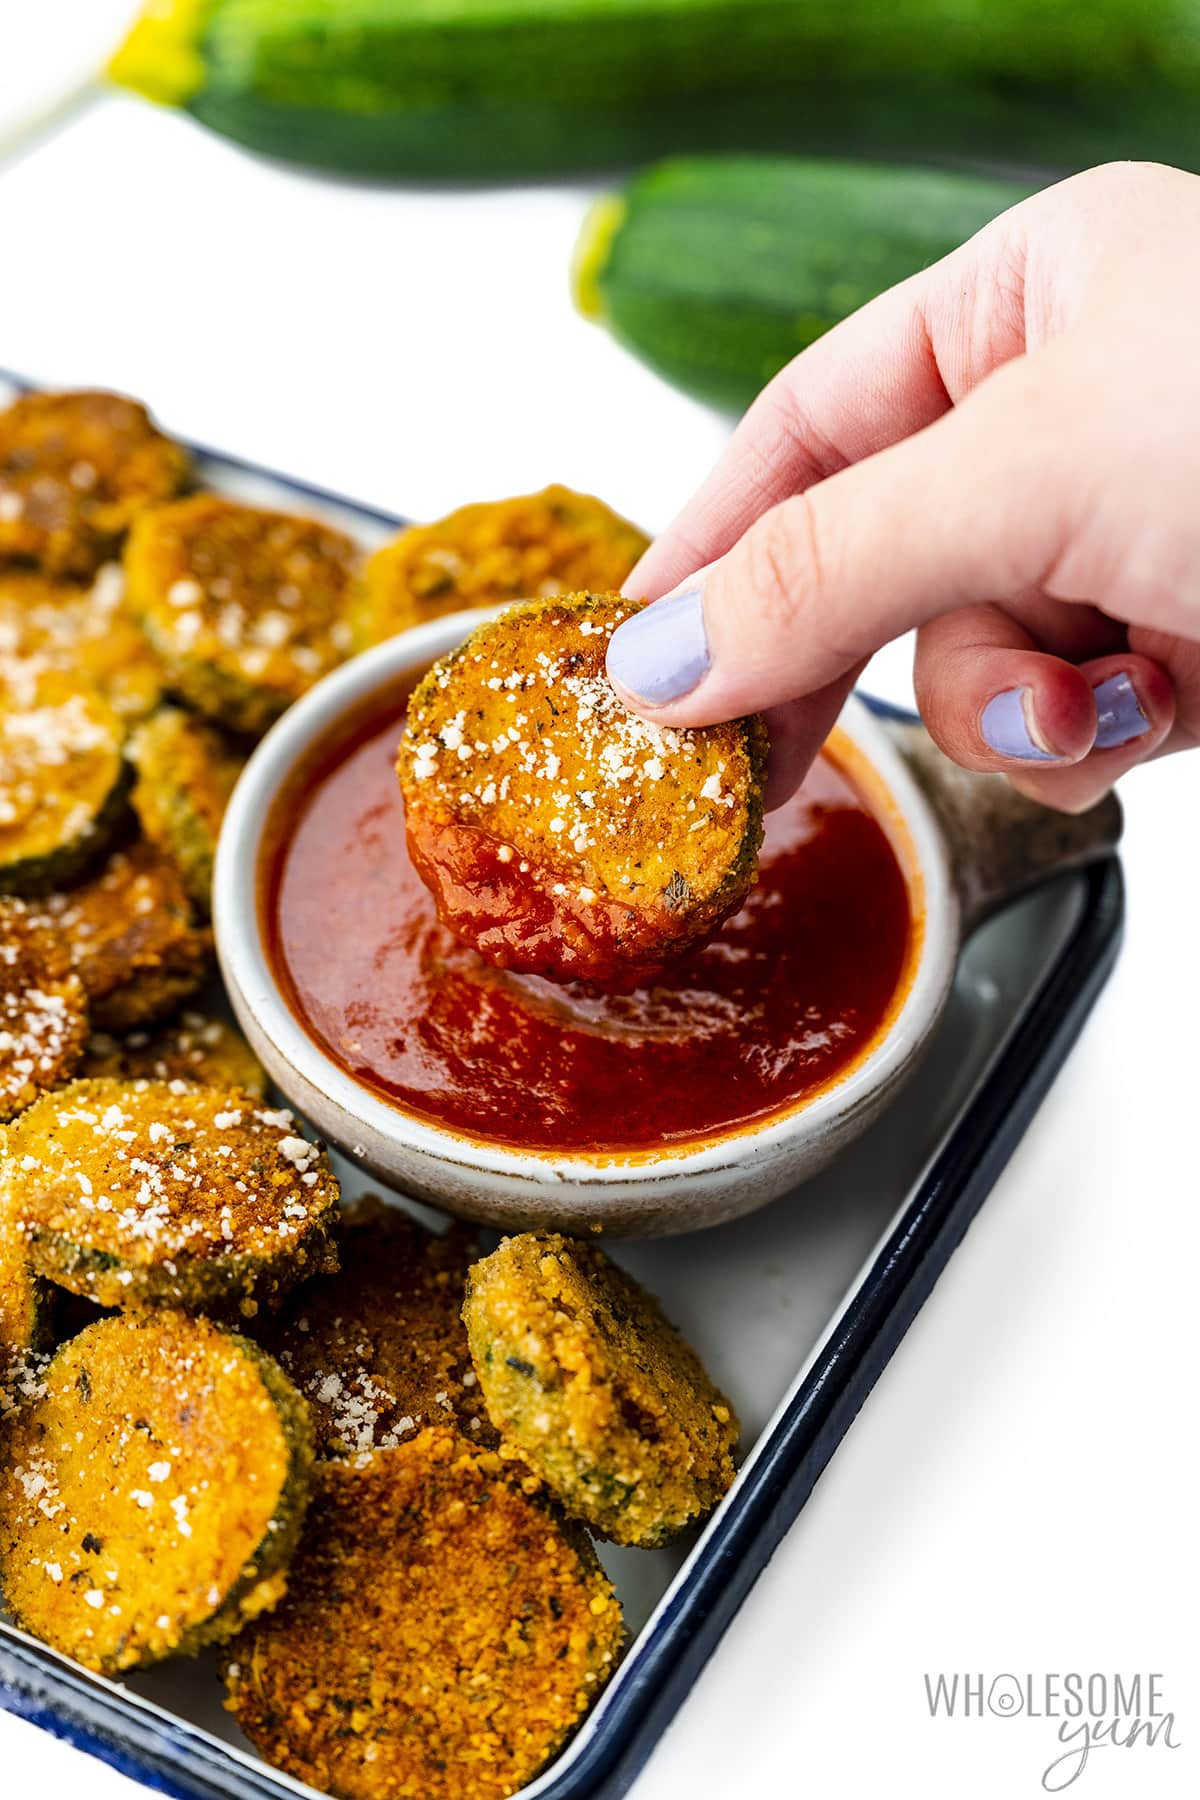 Fried zucchini dipped into sauce.